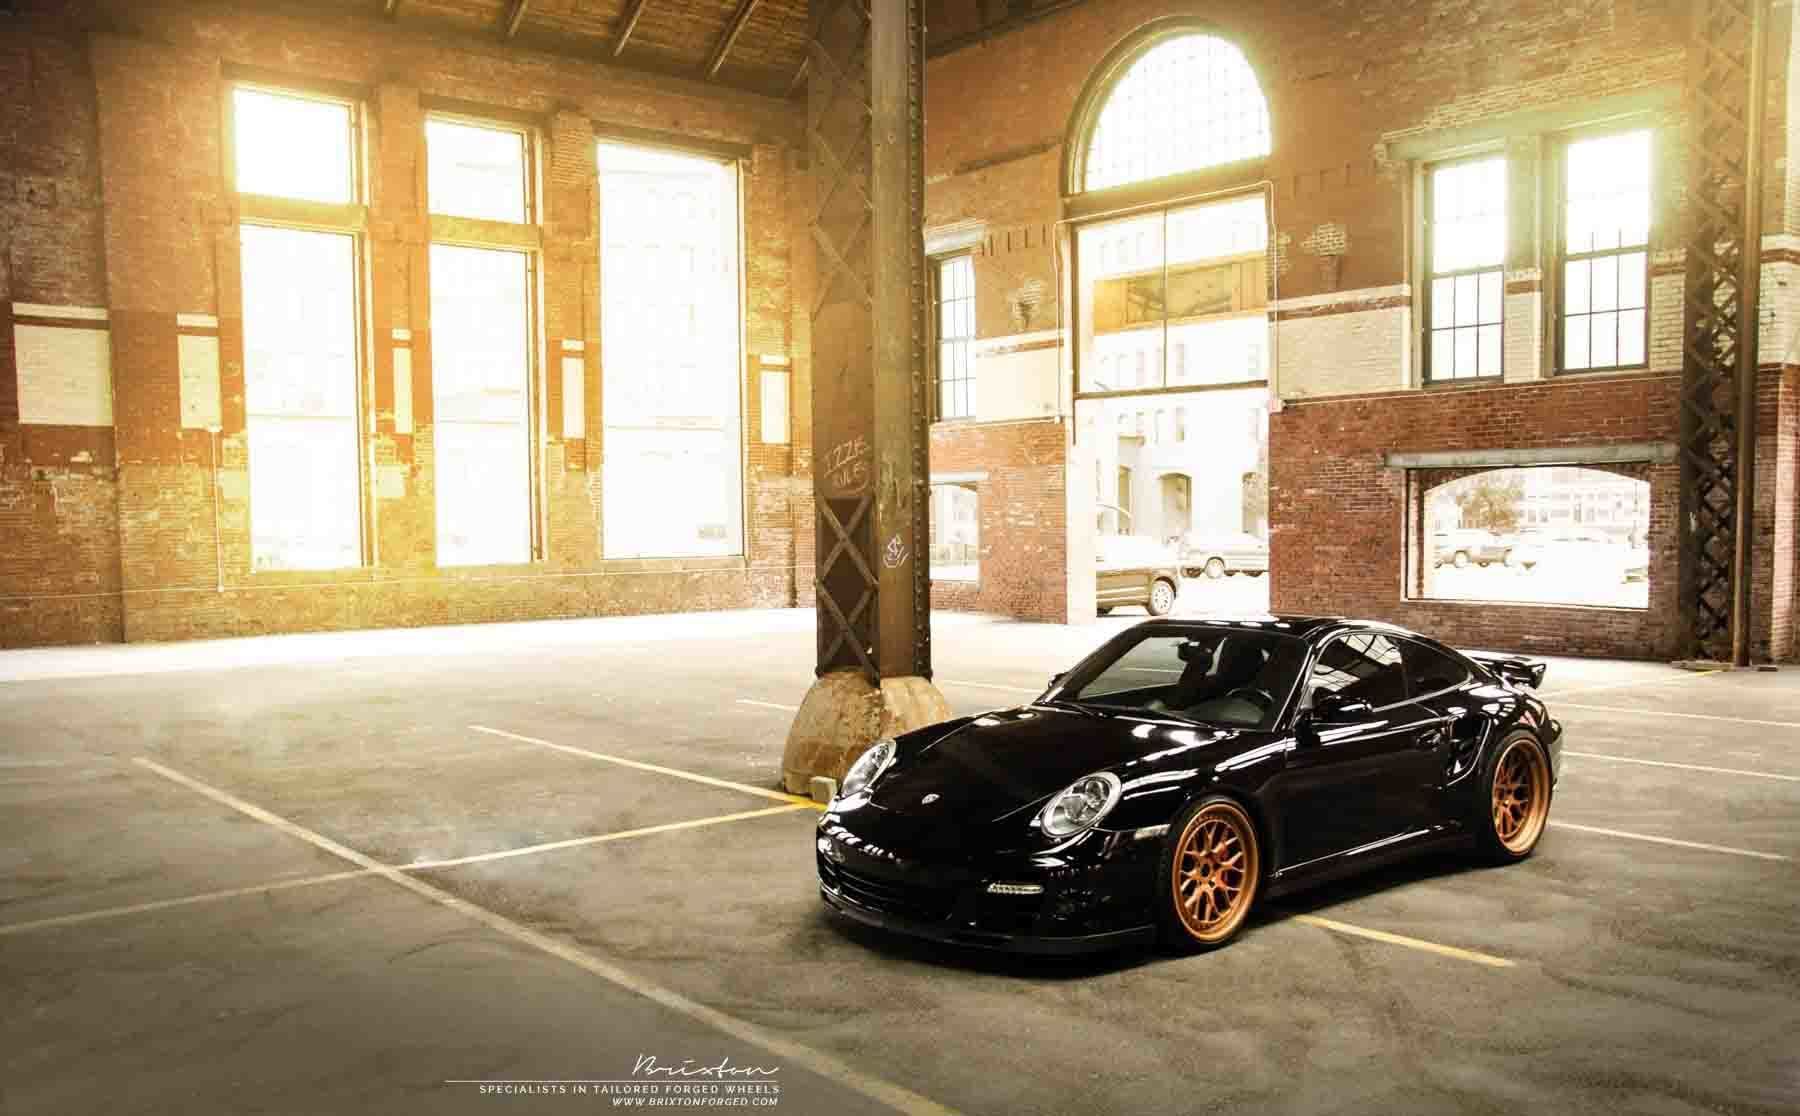 images-products-1-2669-232974957-black-porsche-997-turbo-brixton-forged-cm16-circuit-series-rose-gold-6-1800x1116.jpg